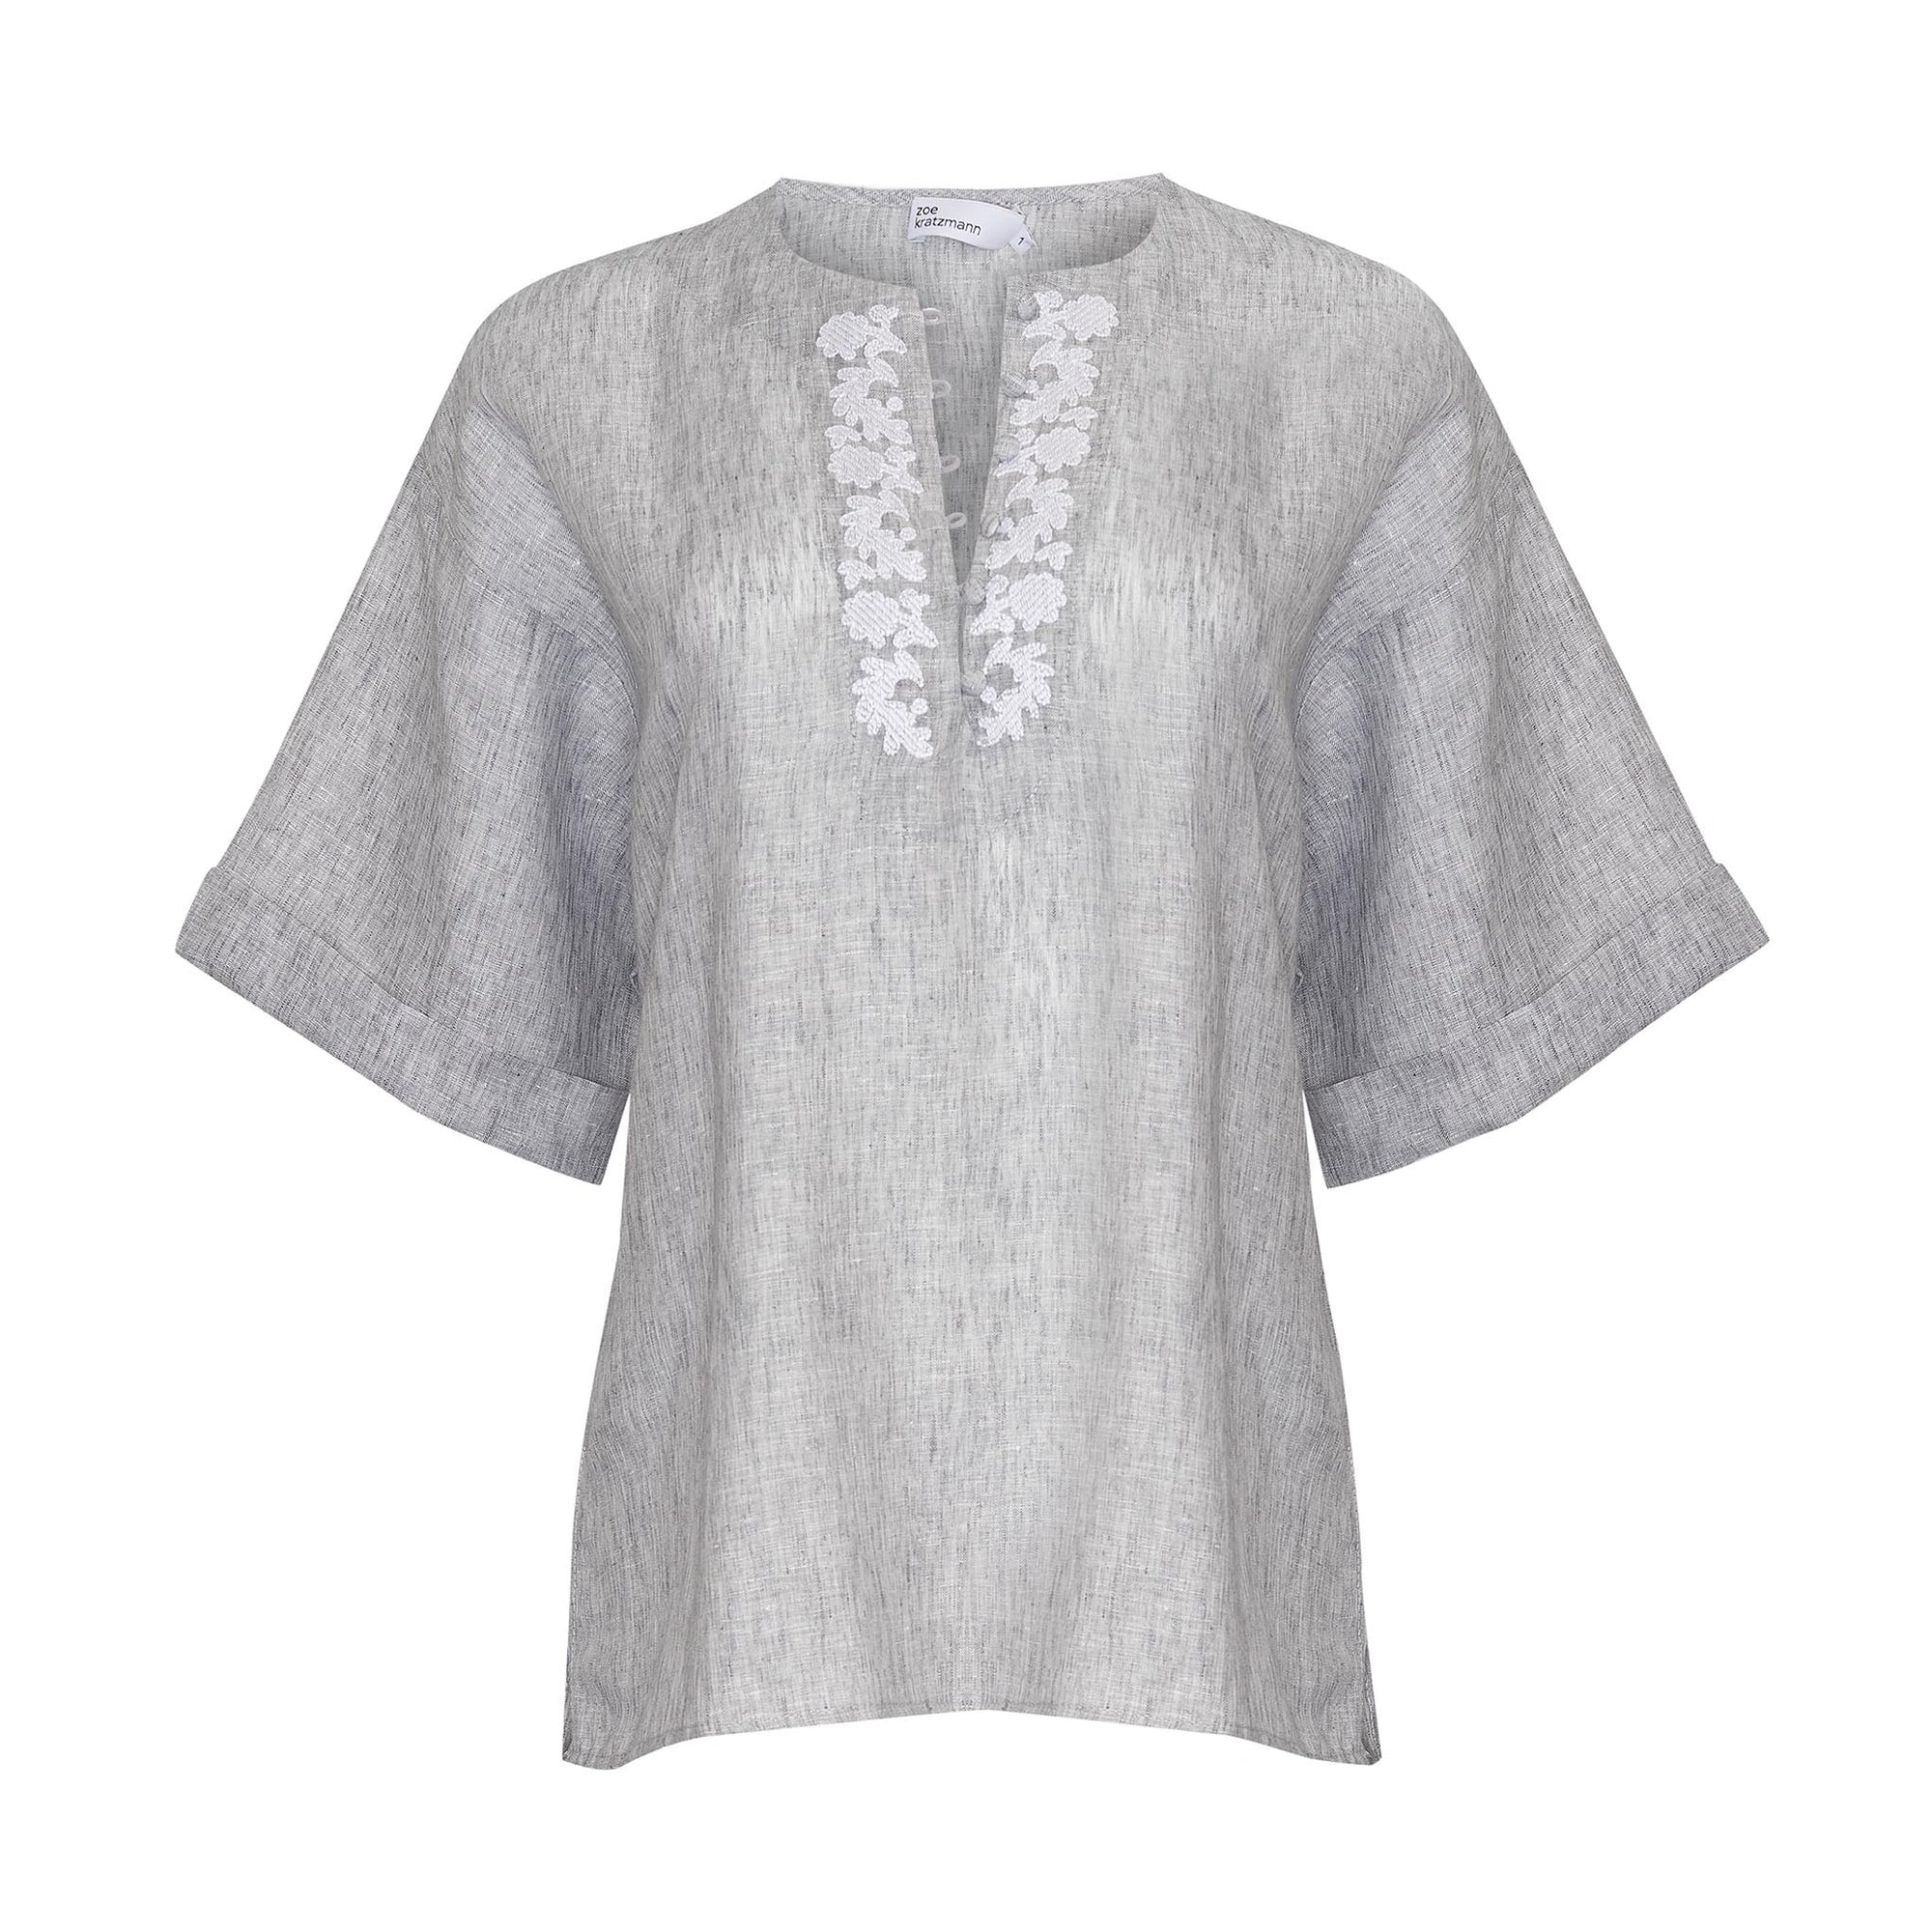 oasis top - oyster/porcelain embroid